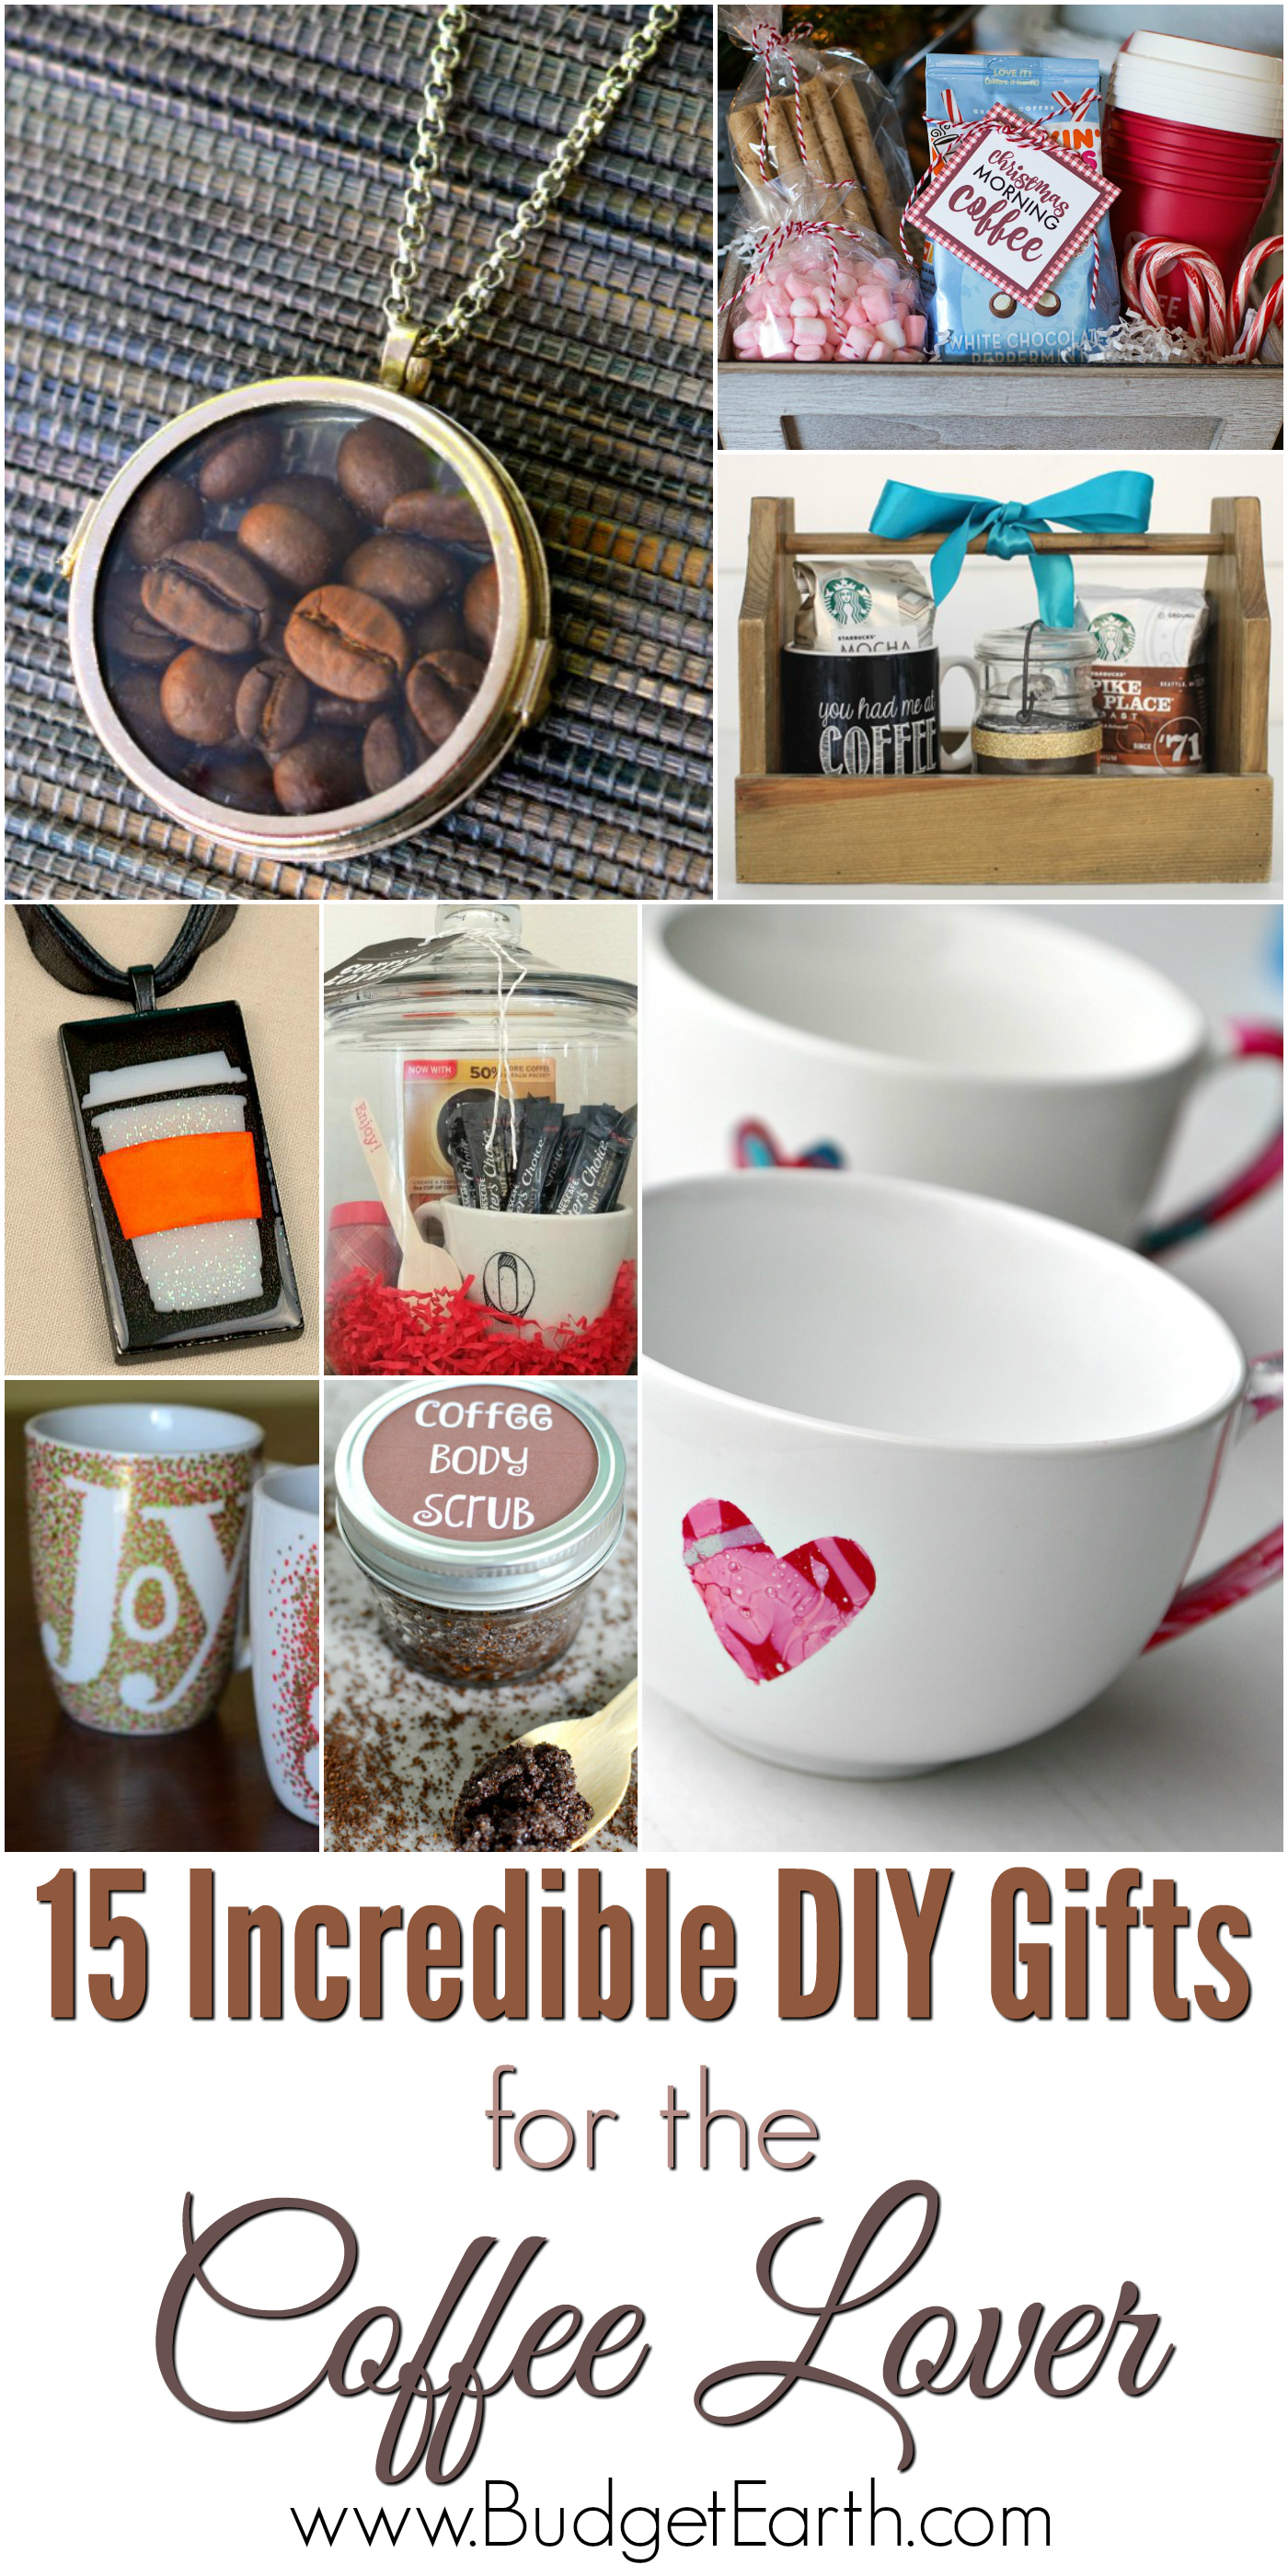 15 Incredible DIY Gifts for the Coffee Lover